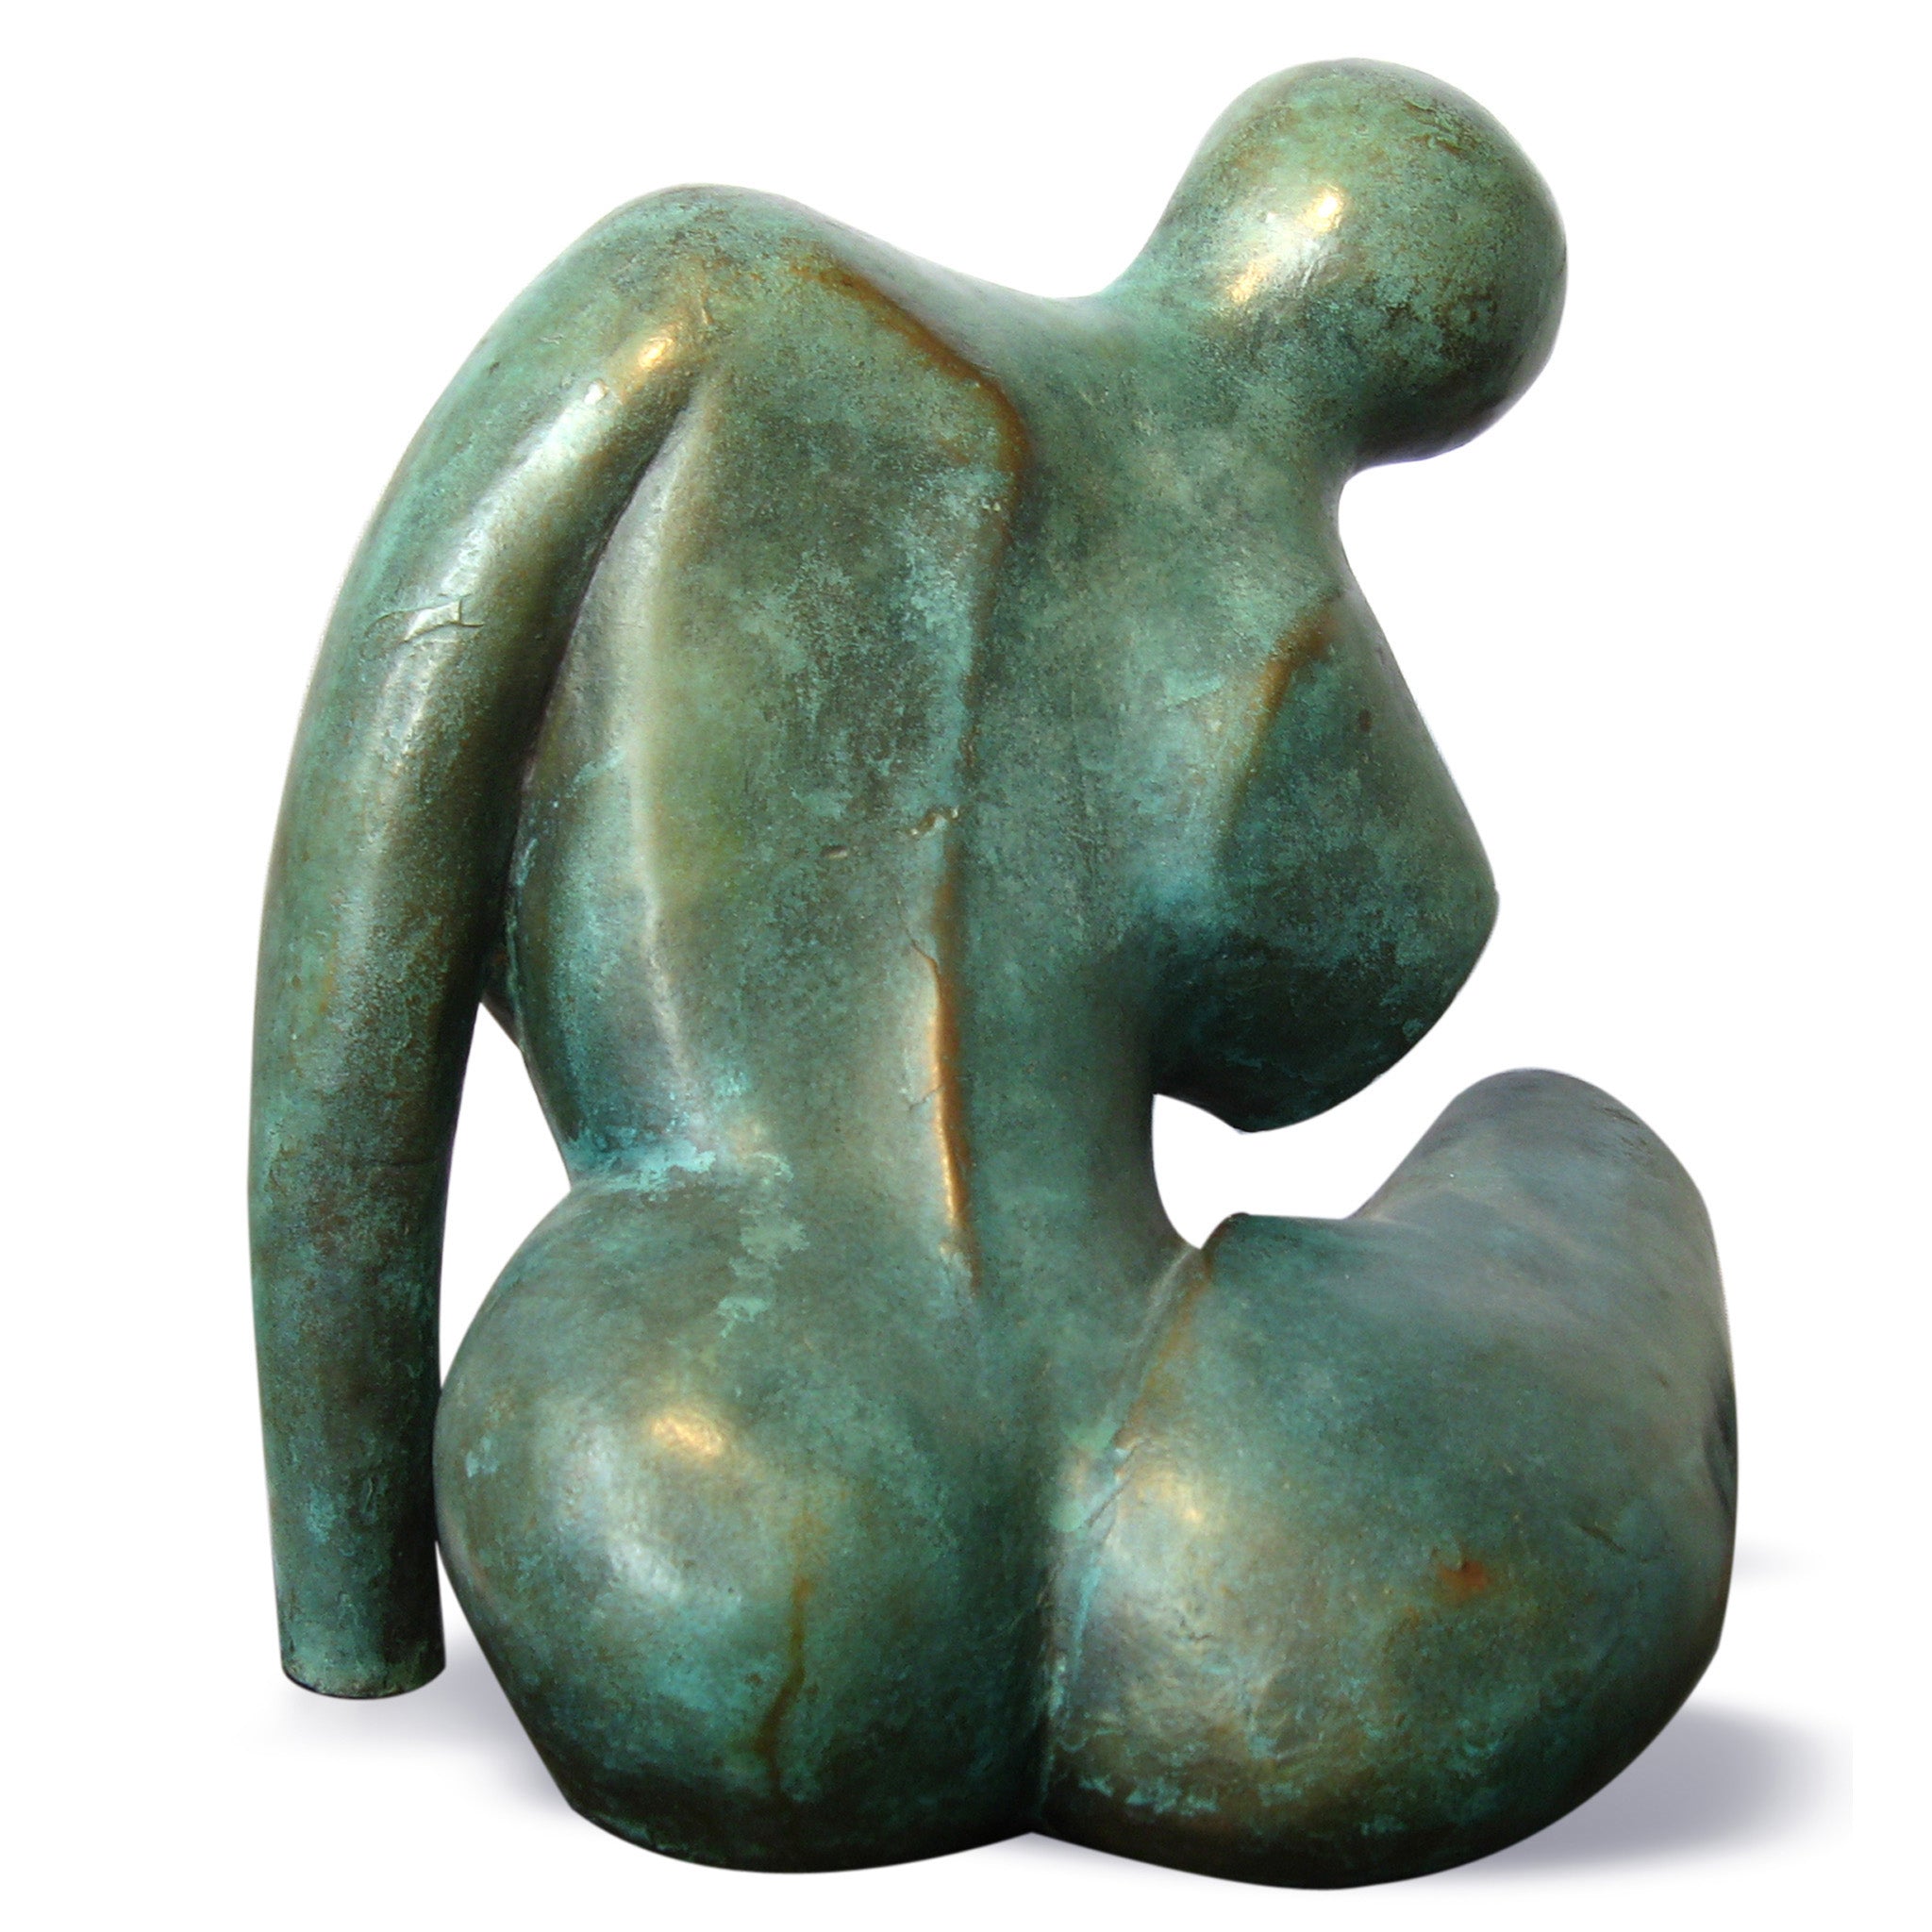 Abstract female figurative bronze sculpture by Stephen Williams.